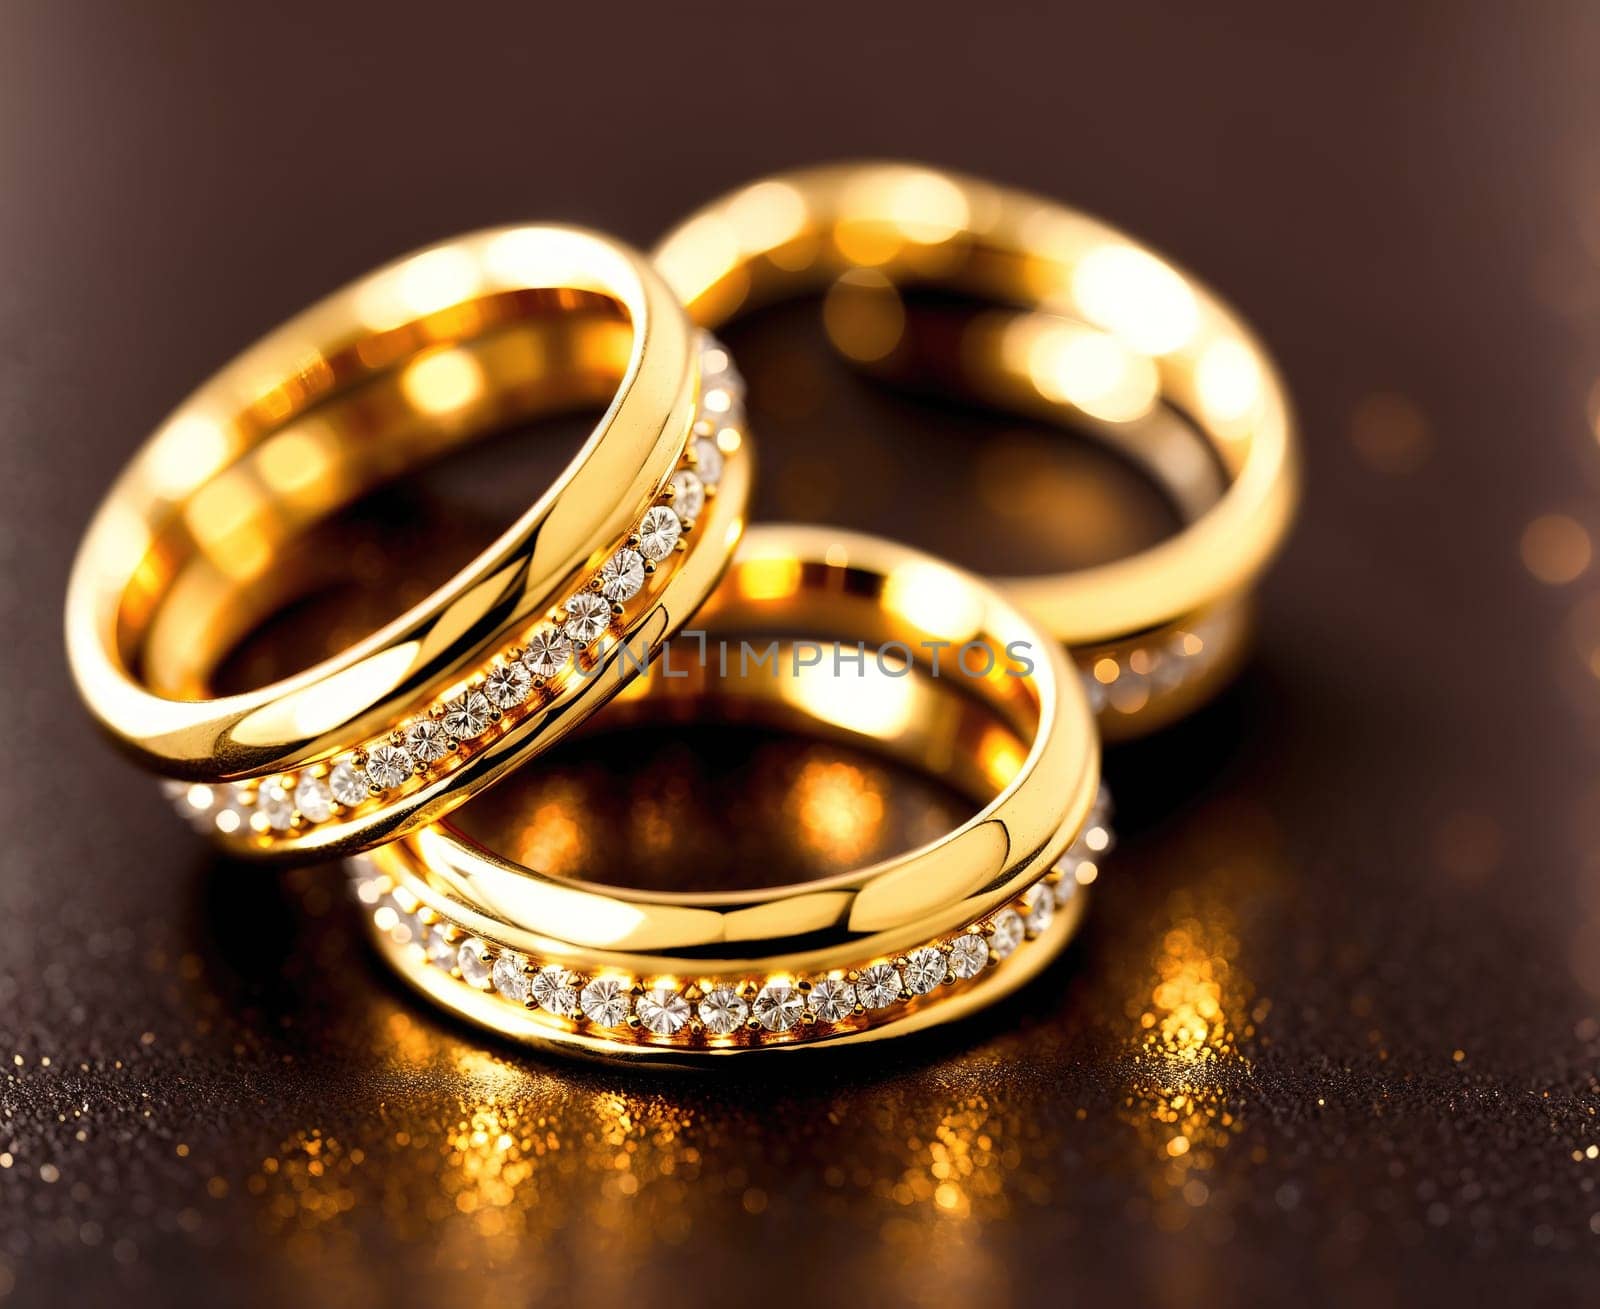 The image is a set of three gold wedding rings with diamonds on them.